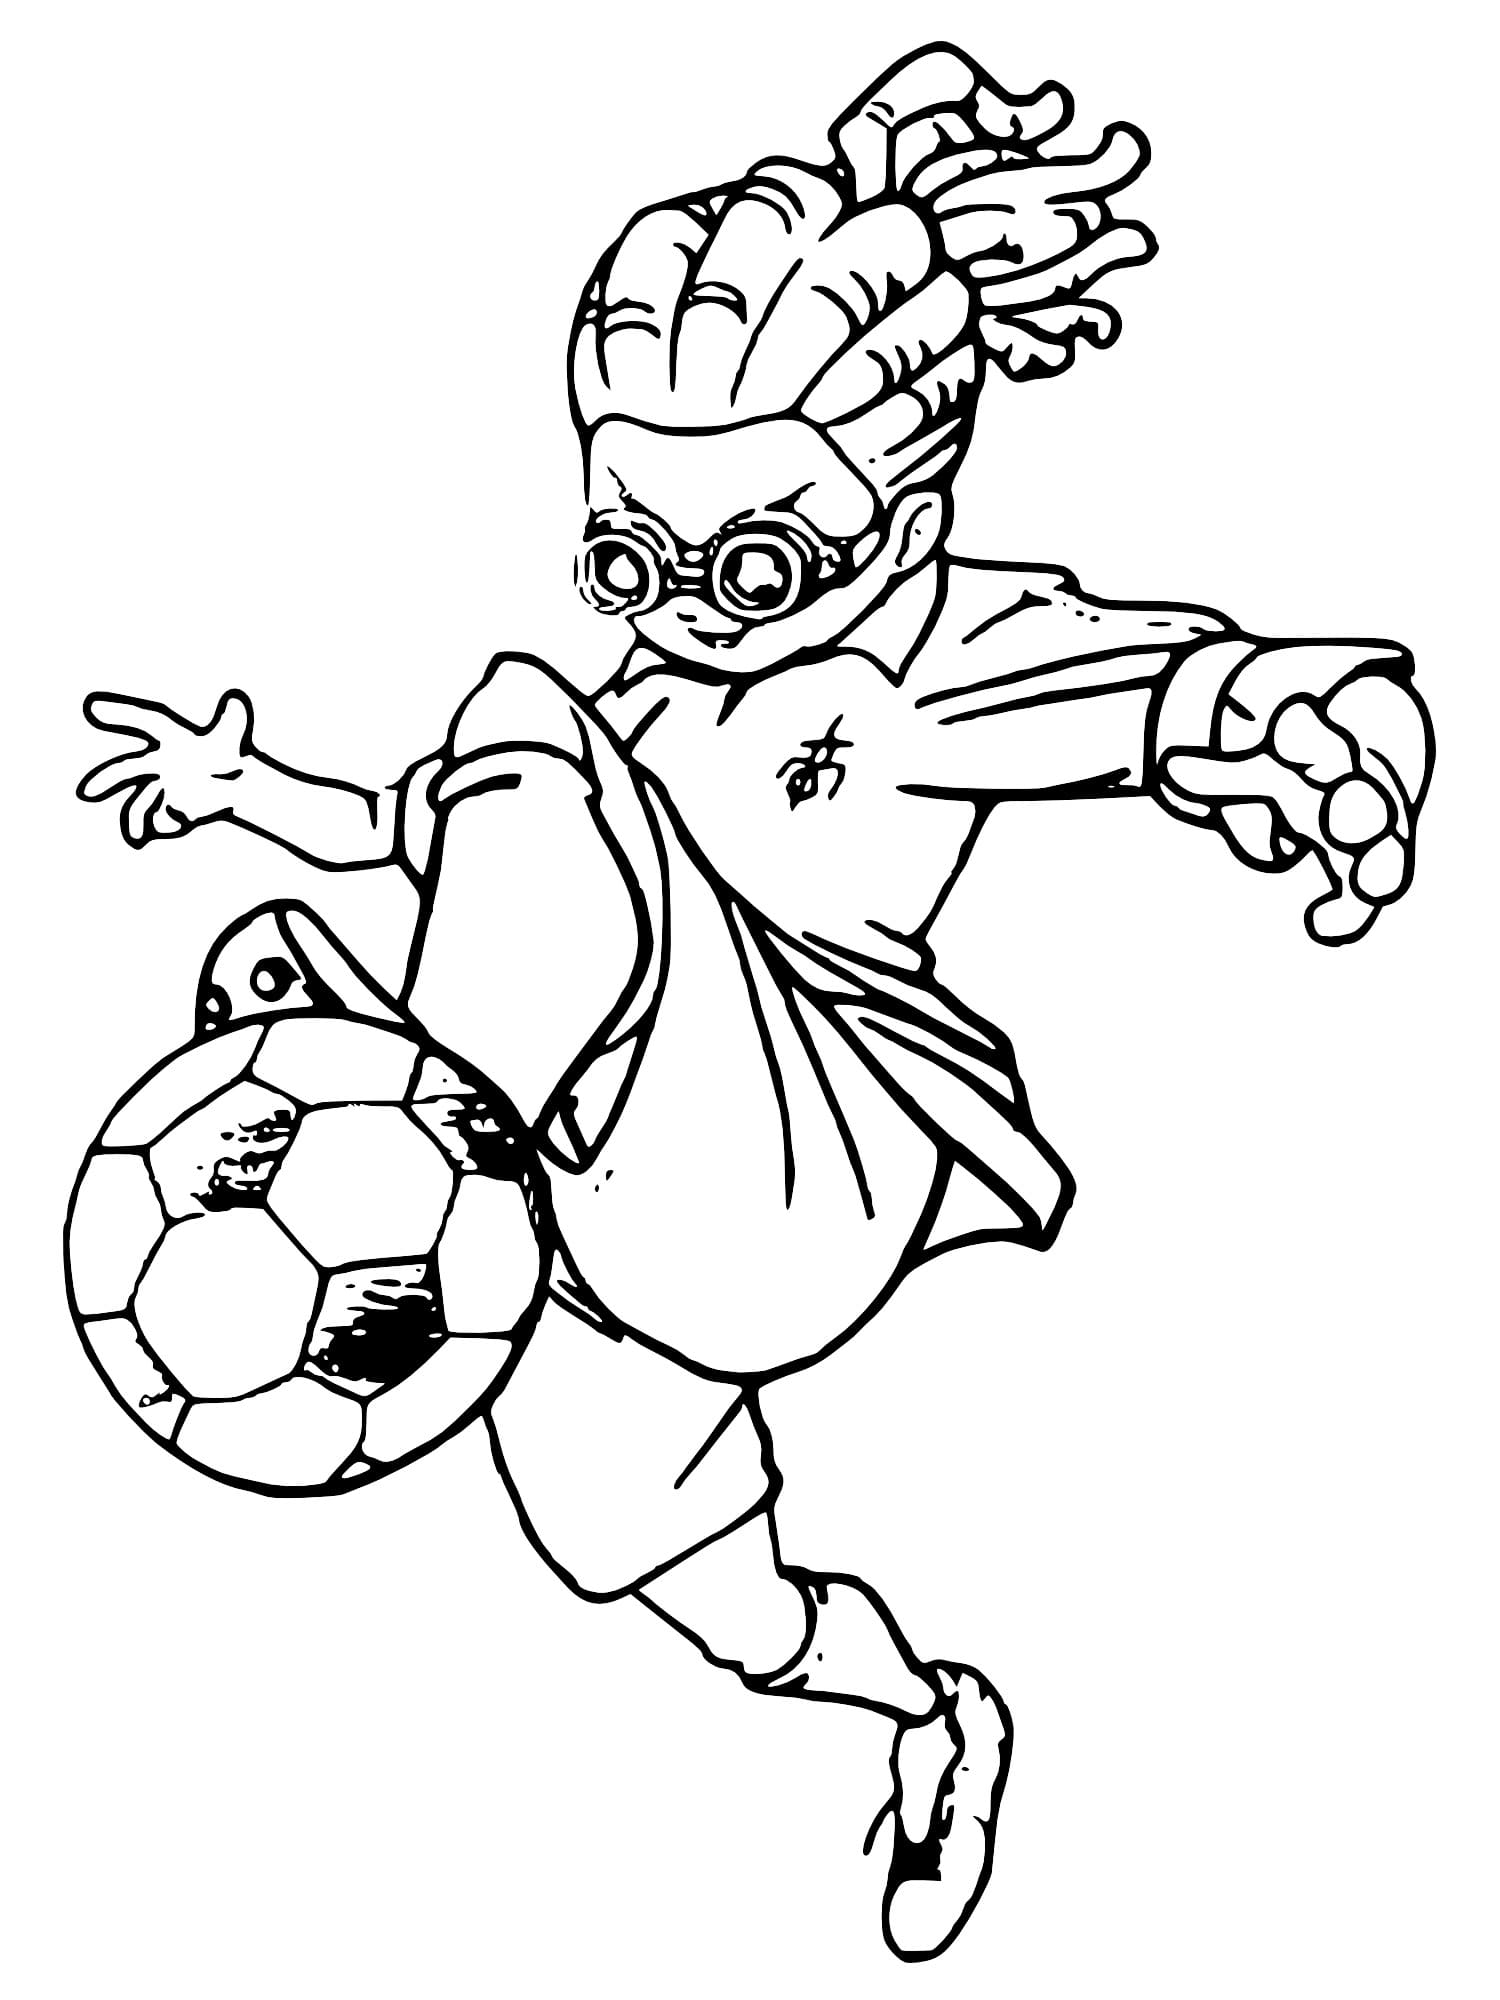 Jude Sharp coloring page